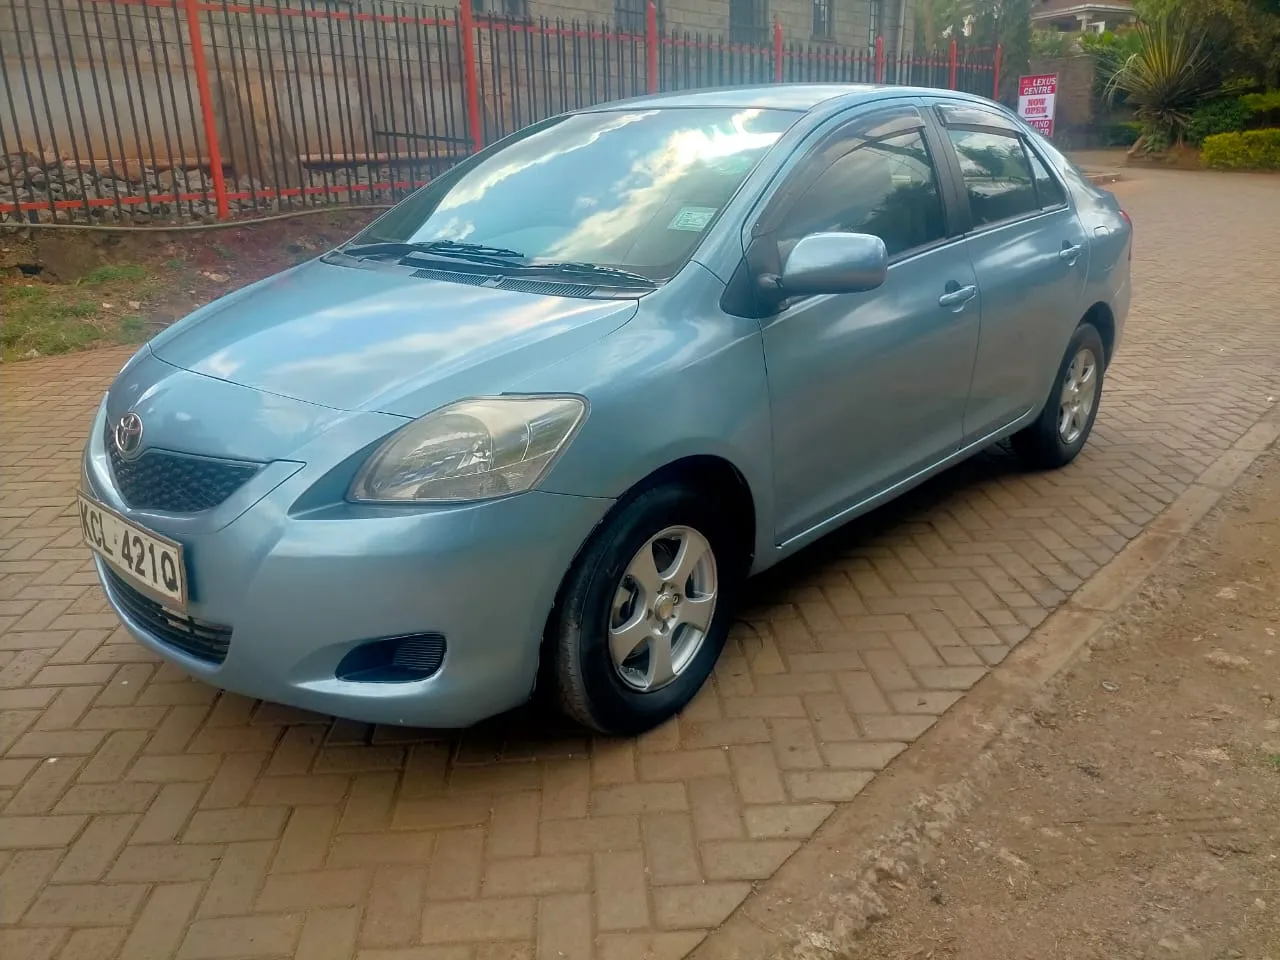 Cars Cars For Sale/Vehicles Saloon/Sedan-Toyota Belta pay 20% & 80% in 60 MONTHS Amazing offer 7